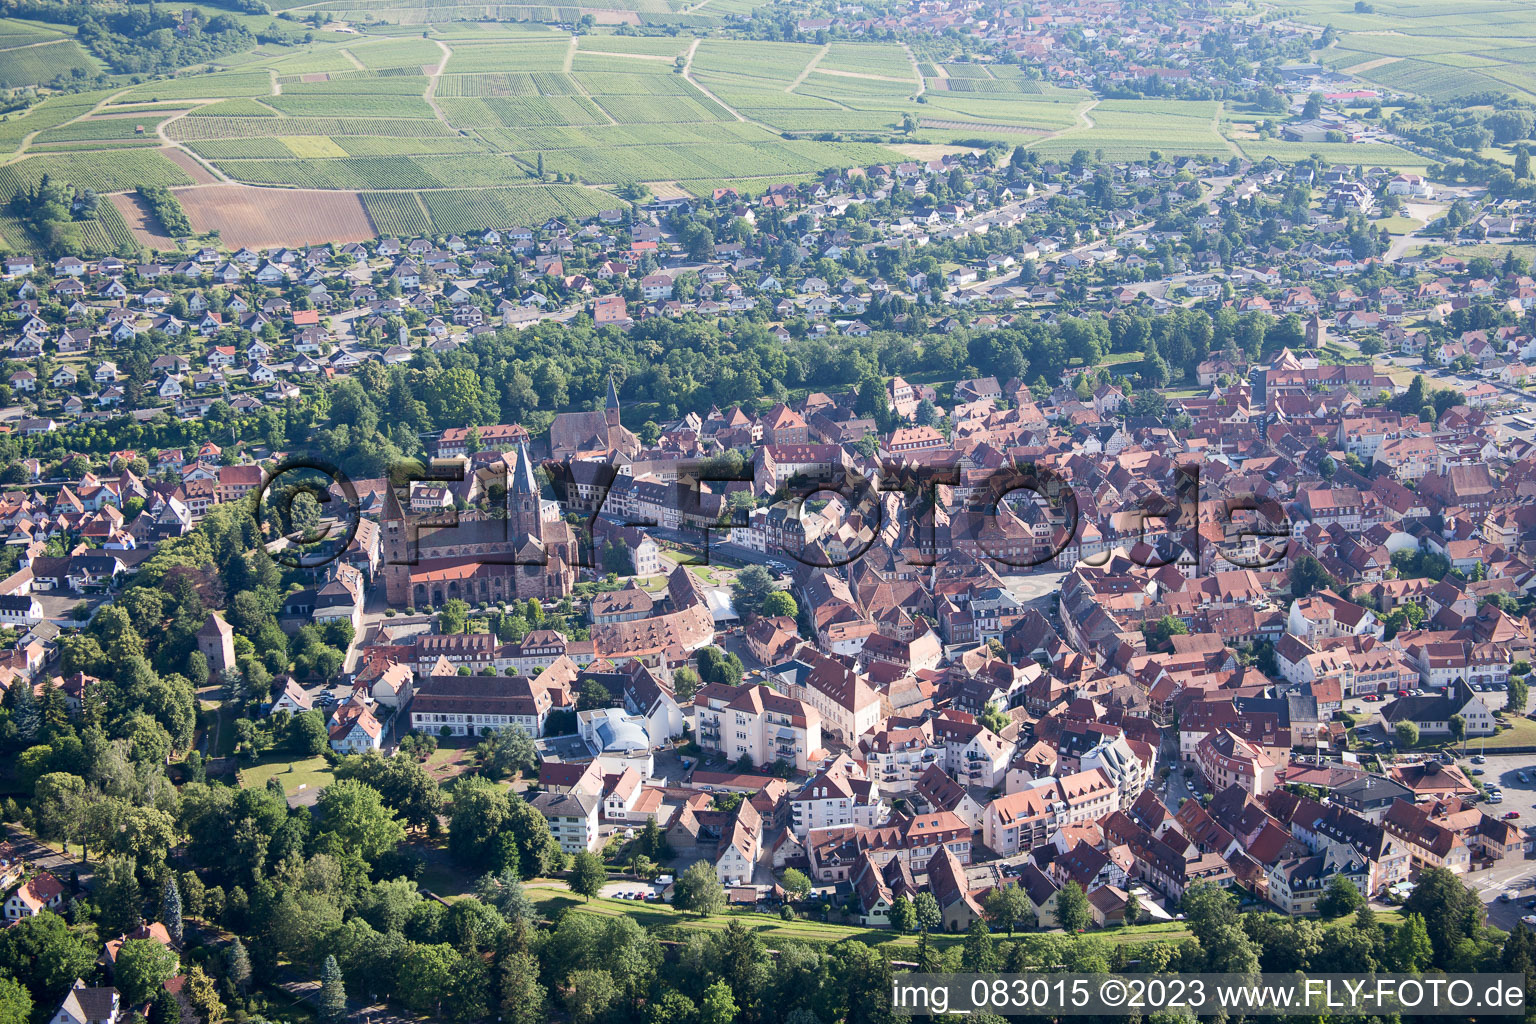 Wissembourg in the state Bas-Rhin, France seen from above